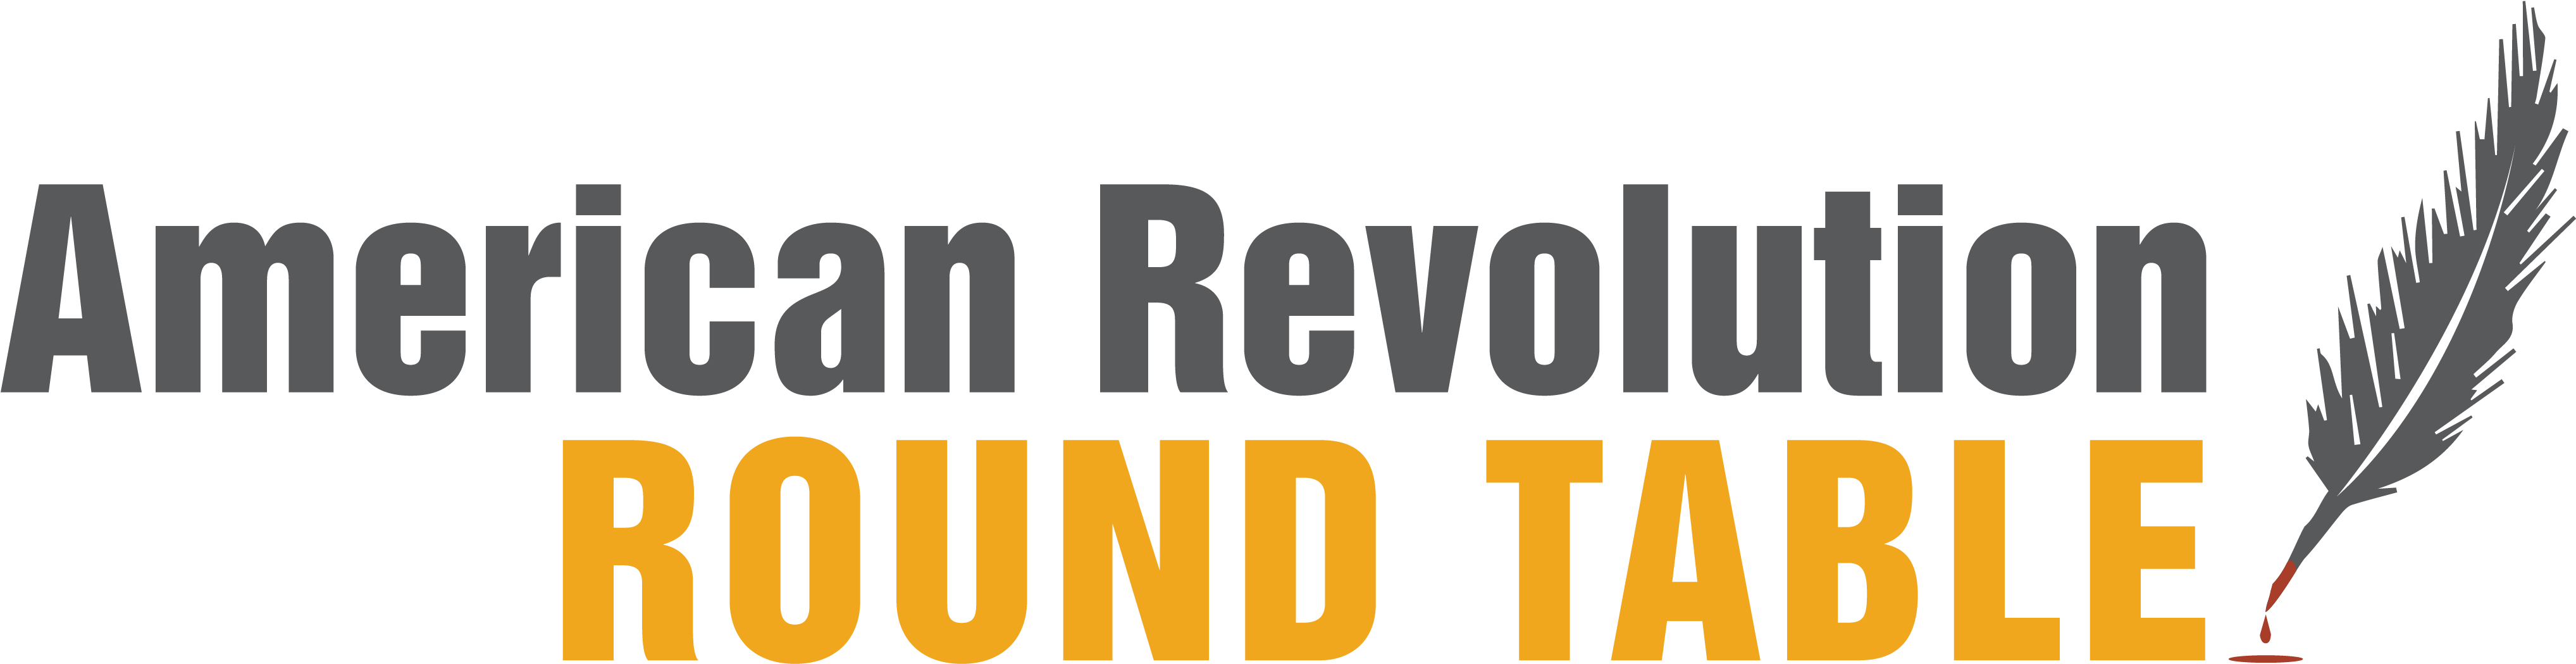 American Revolution Round Table Logo PNG image